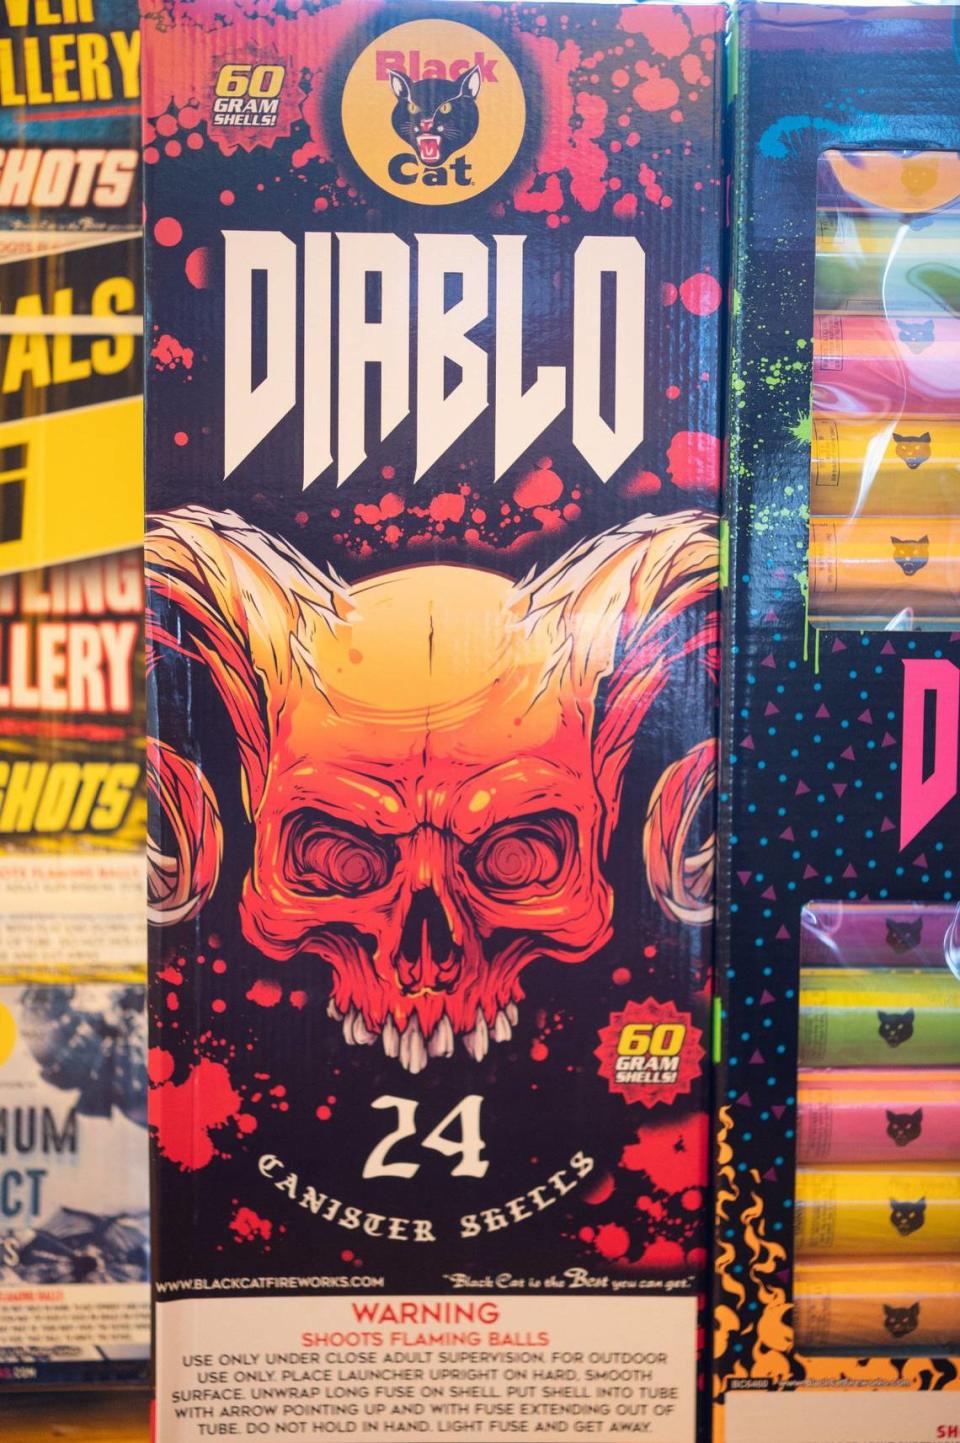 The Diablo, a canister shell firework produced by Black Cat and known for its intensely loud explosions, was a favorite selection at the fireworks stand located near Rainbow Boulevard and Southwest Boulevard in Kansas City, Kansas.